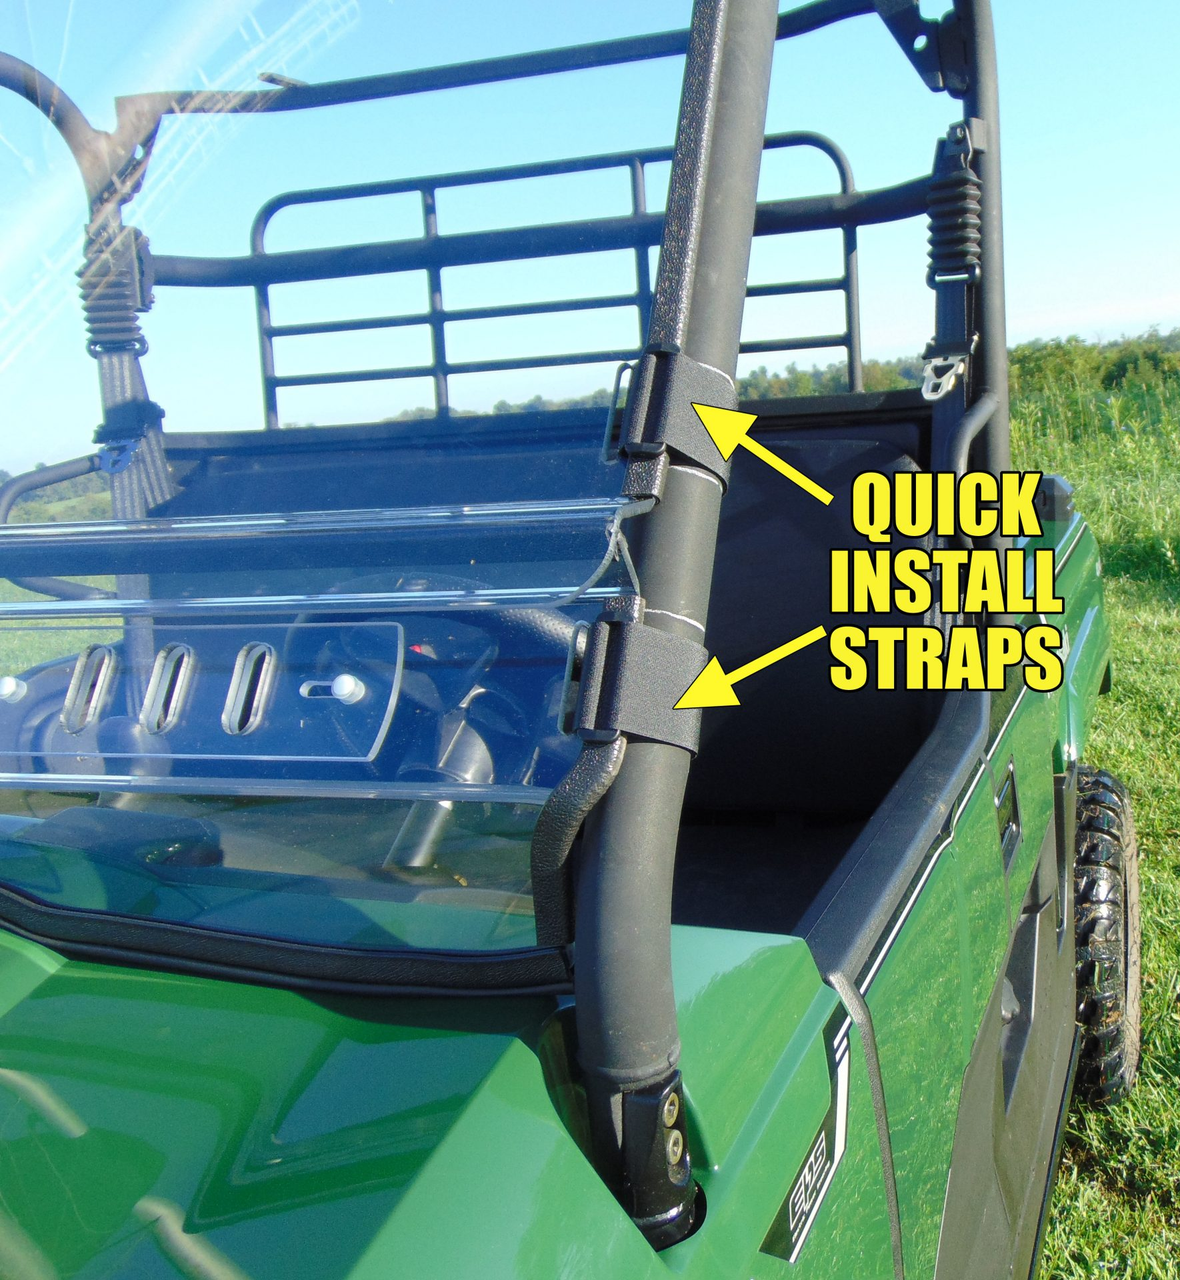 3 Star, side x side, arctic cat, wildcat 4, quick install straps